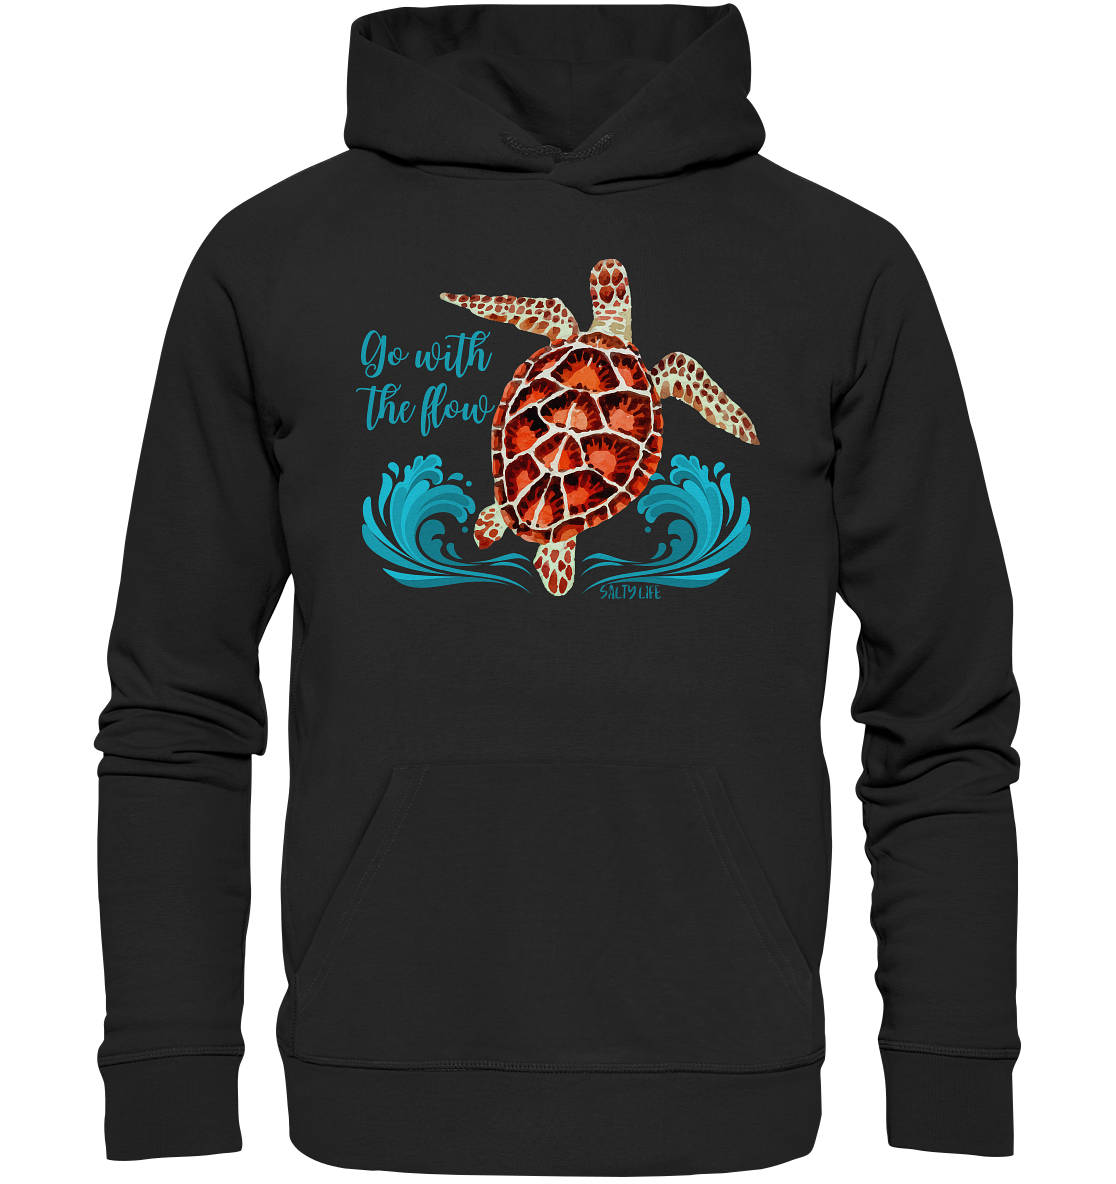 Turtle - Go with the flow  - Organic Hoodie